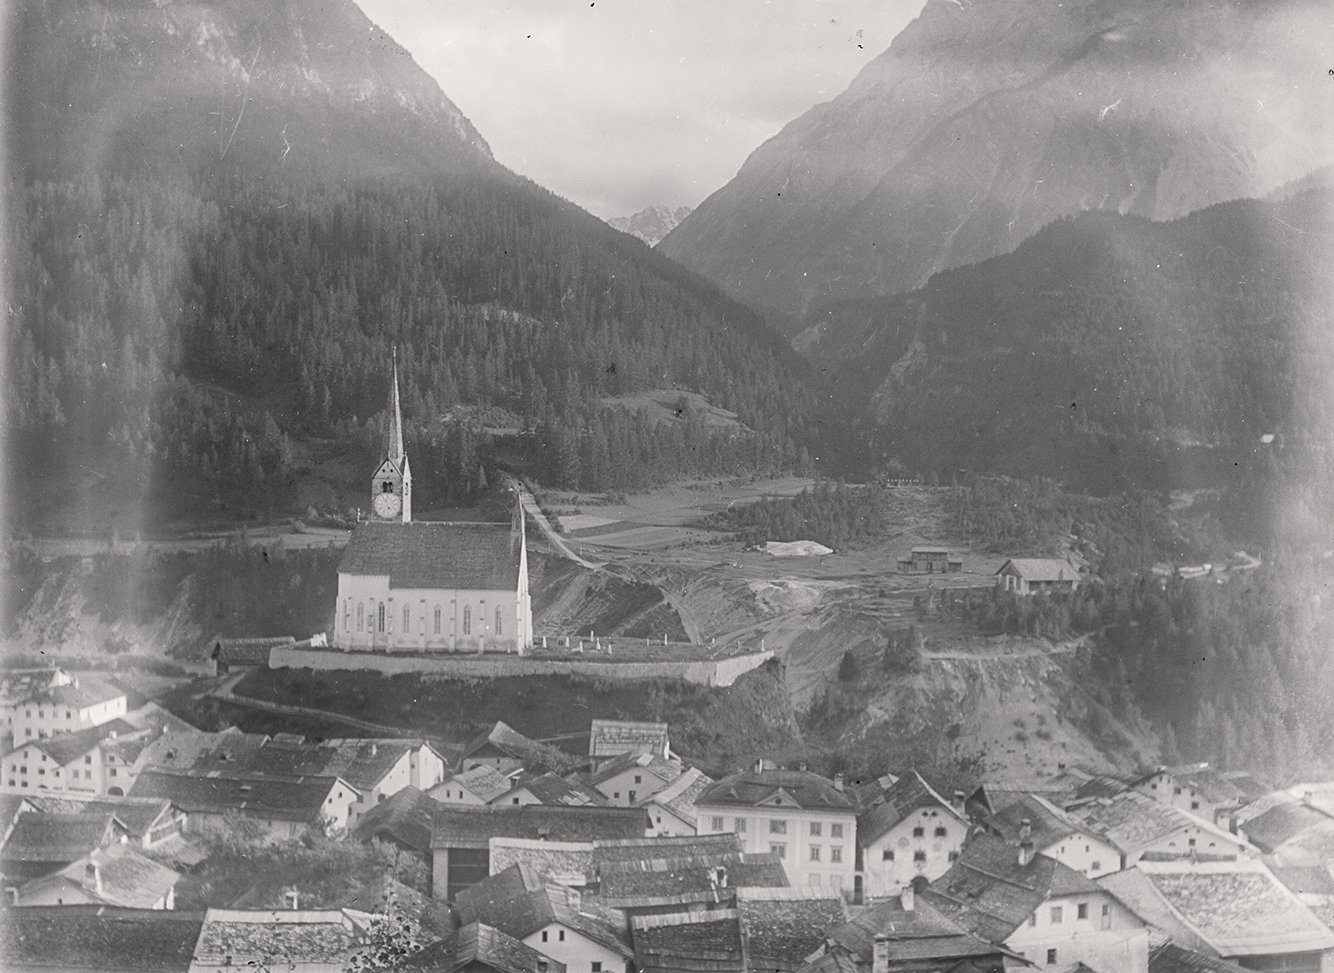 Aussicht vom Fenster des Hotels Belvédère in Scuol (14.09.1897), 86430_o (DRM CC BY-NC-SA)